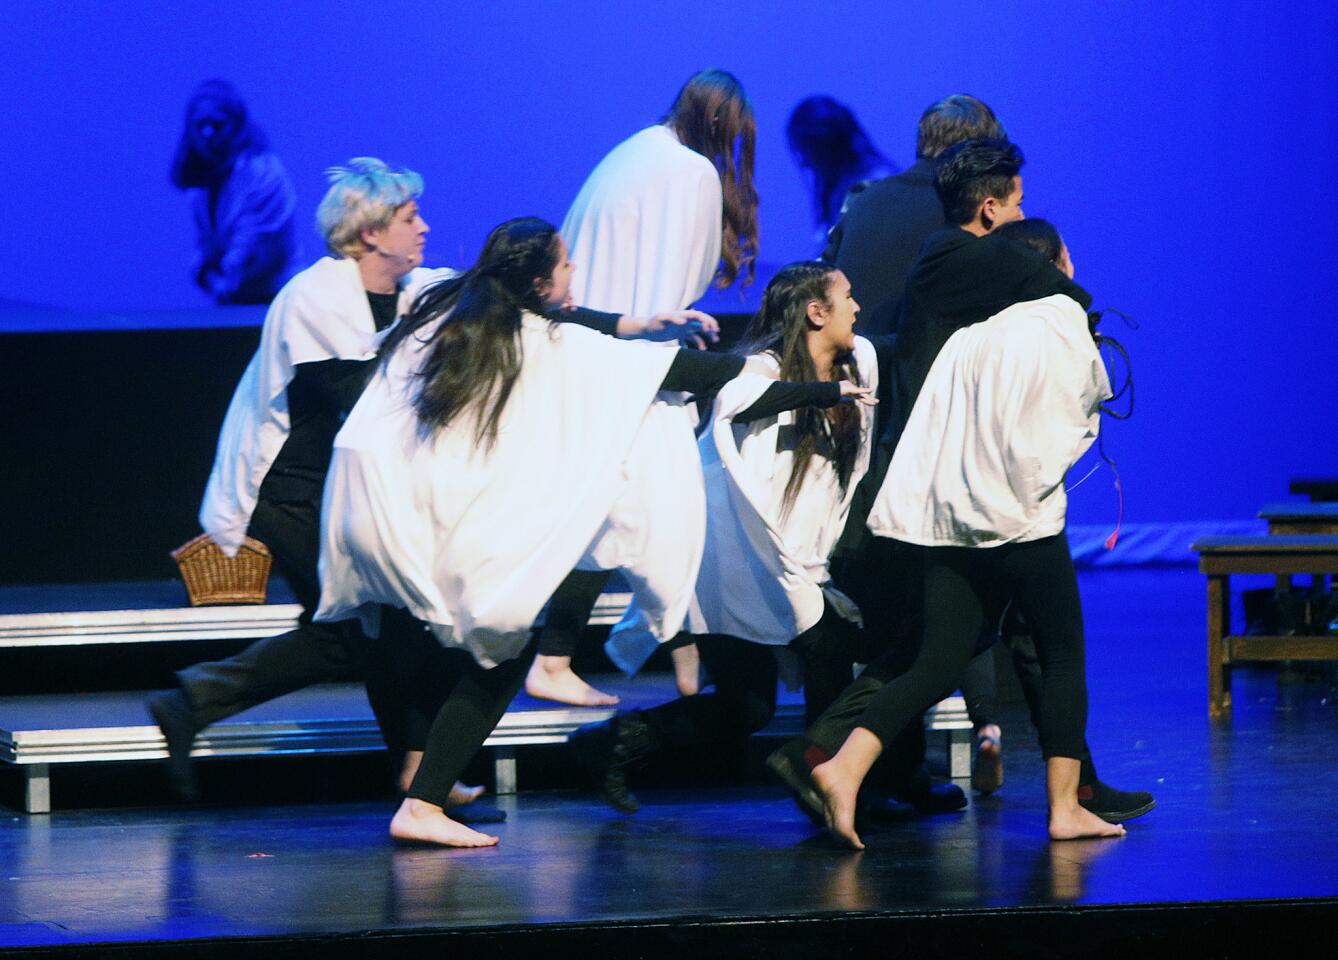 Photo Gallery: A Journey of Angels play with music about survival during the Armenian Genocide at Crescenta Valley High School